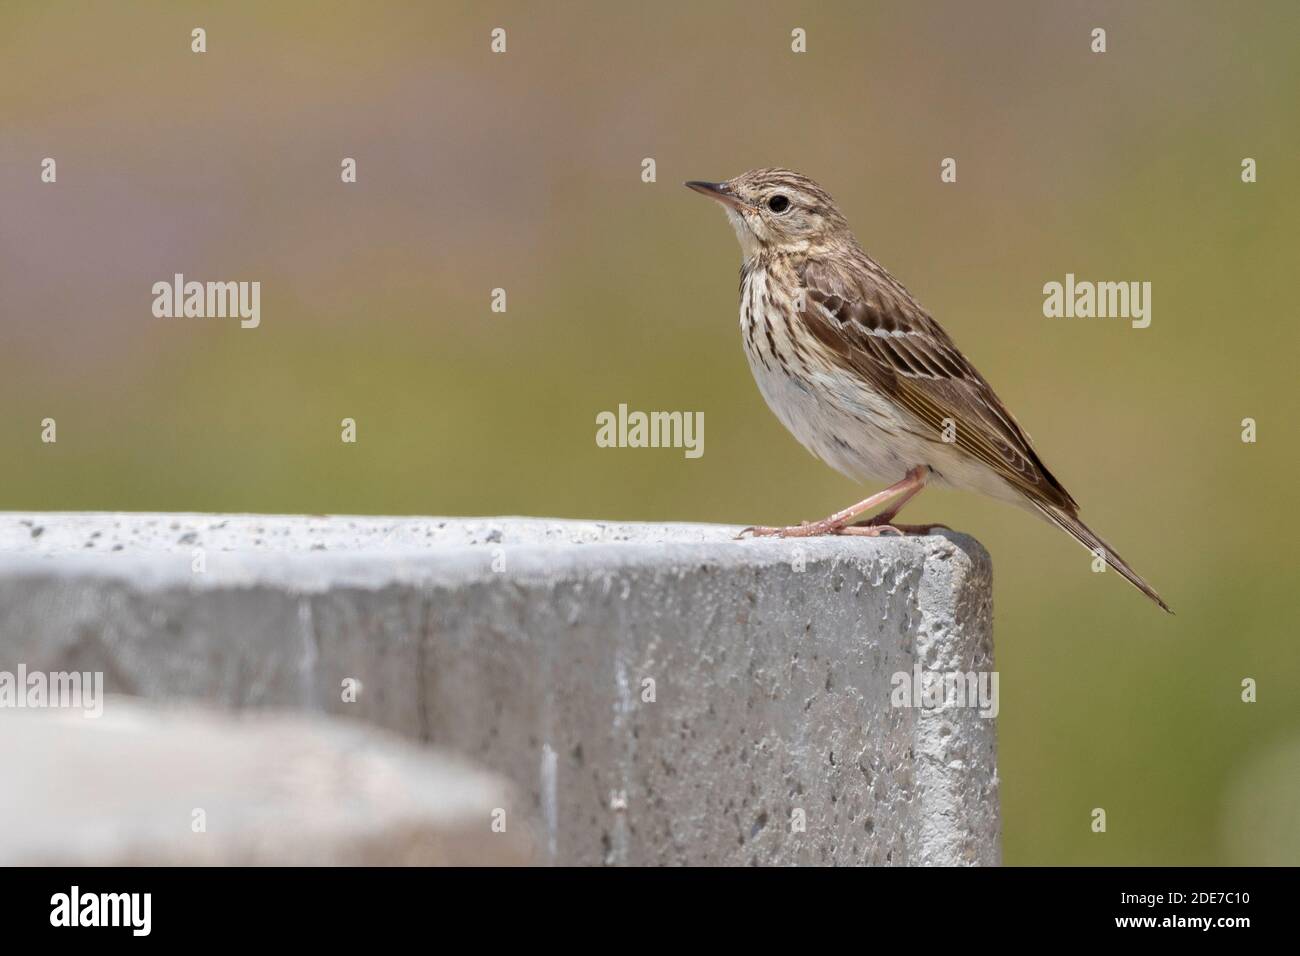 Tree Pipit (Anthus trivialis), side view of an adult perched on a wall, Abruzzo, Italy Stock Photo